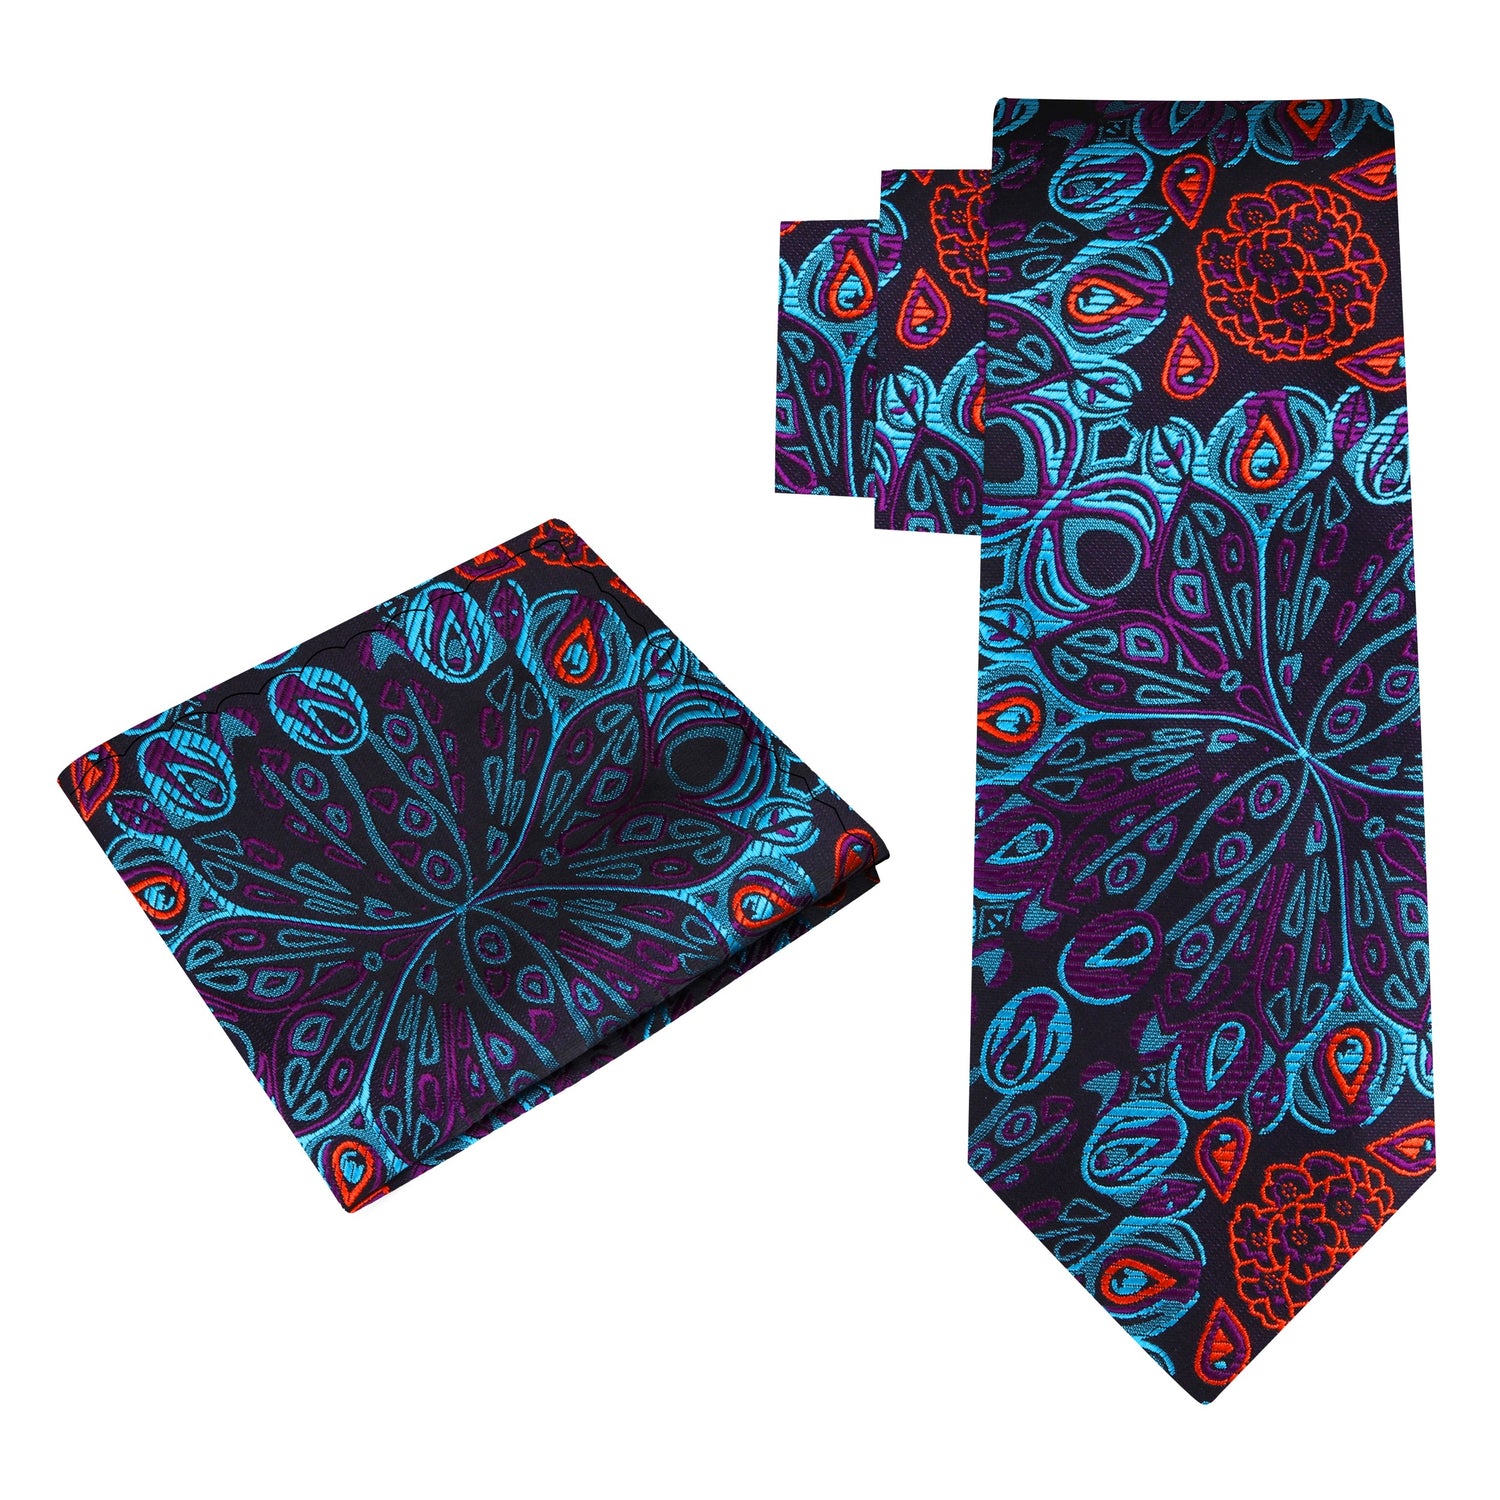 Alt View: A Teal, Orange, Purple Abstract Peacock Feather Pattern Silk Necktie, Matching Pocket Square